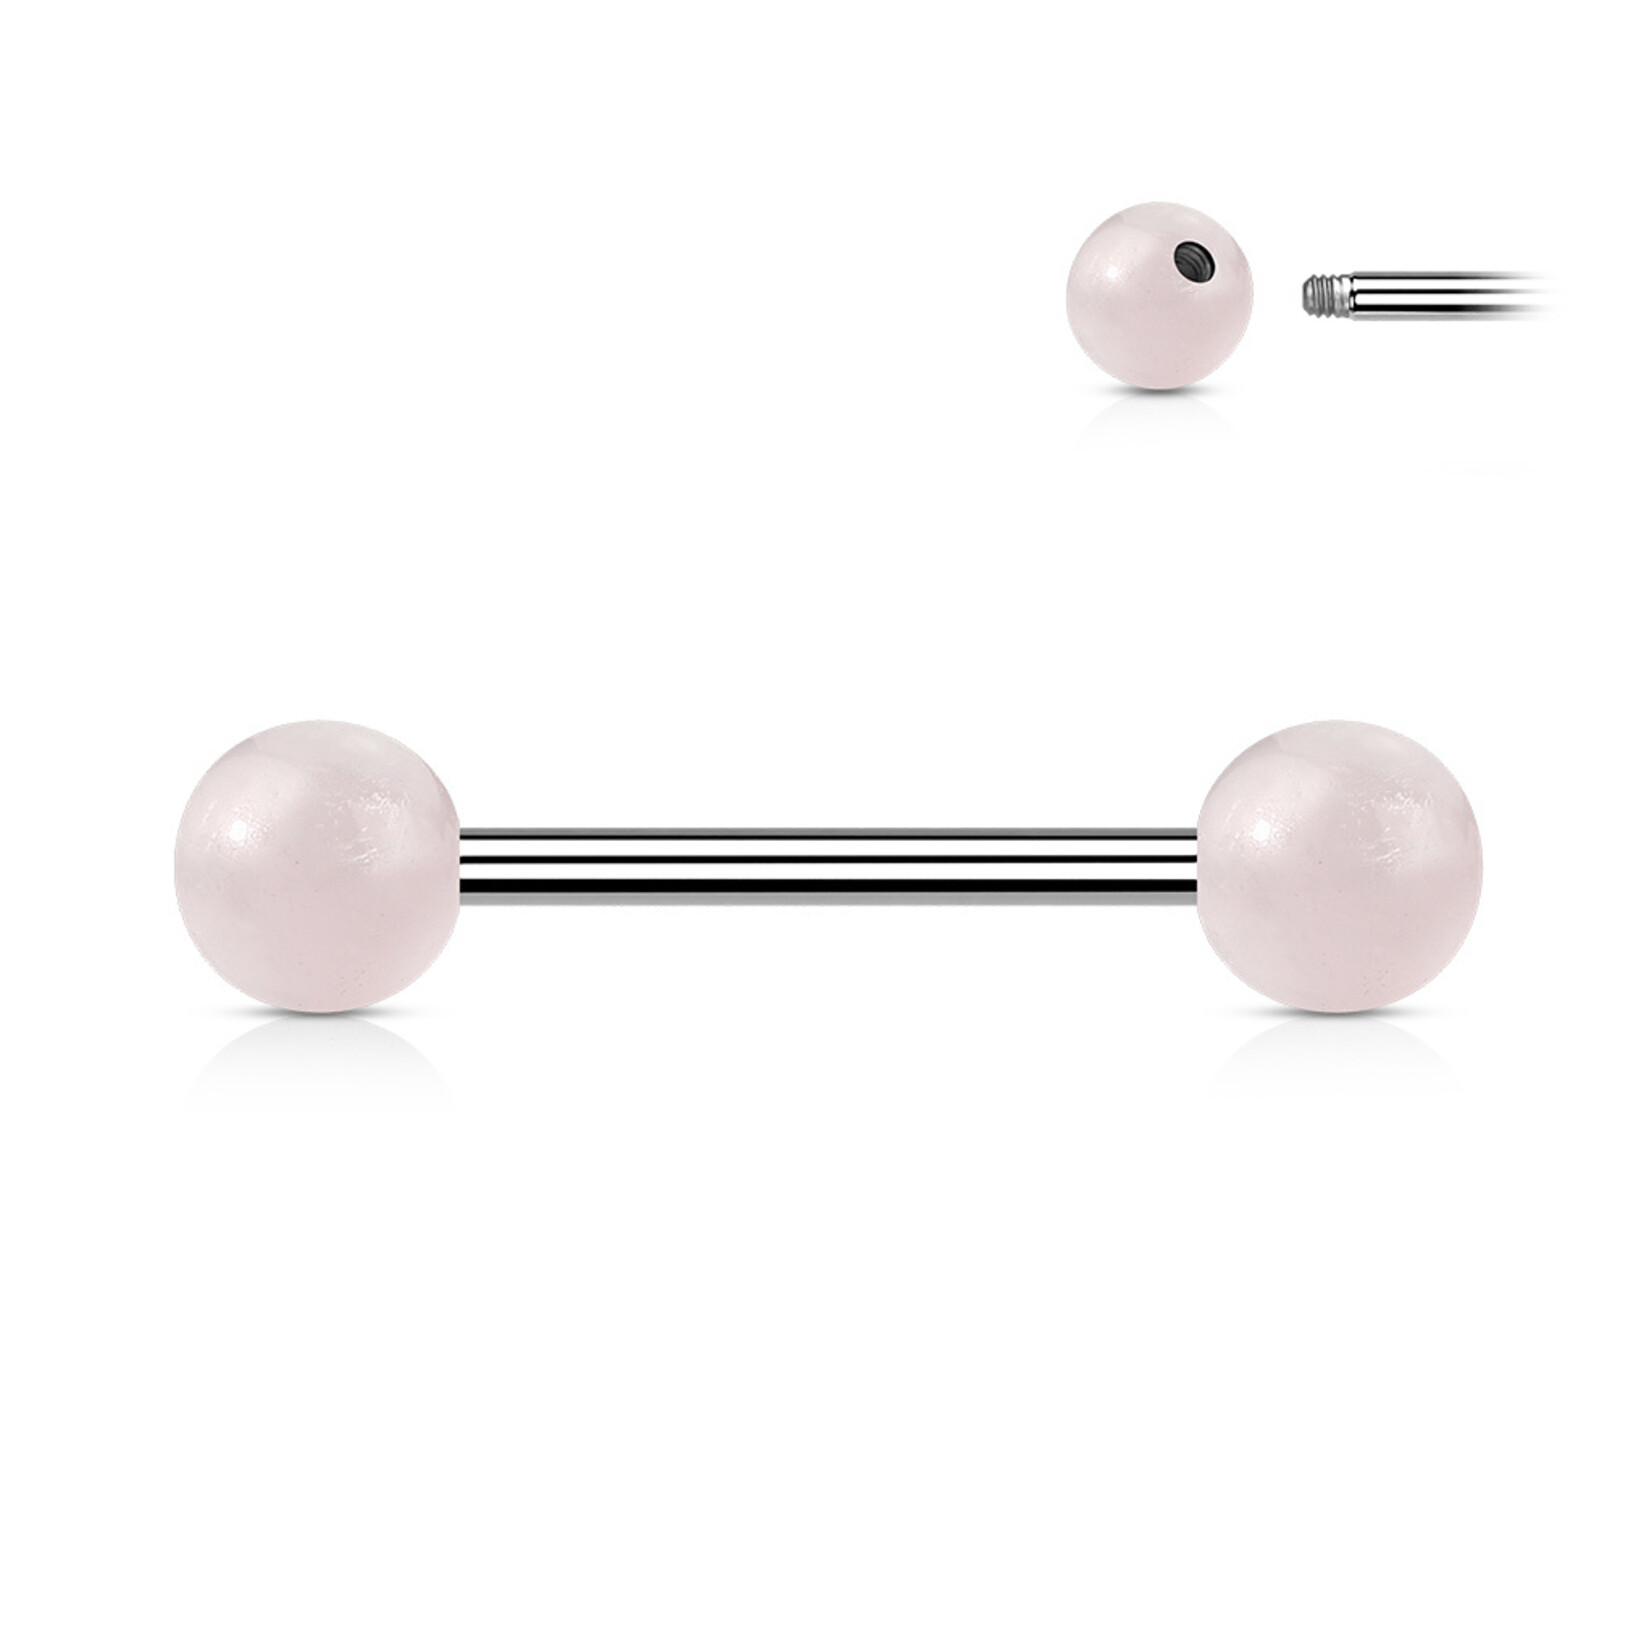 Hollywood Body Jewelry Natural Stone Barbell